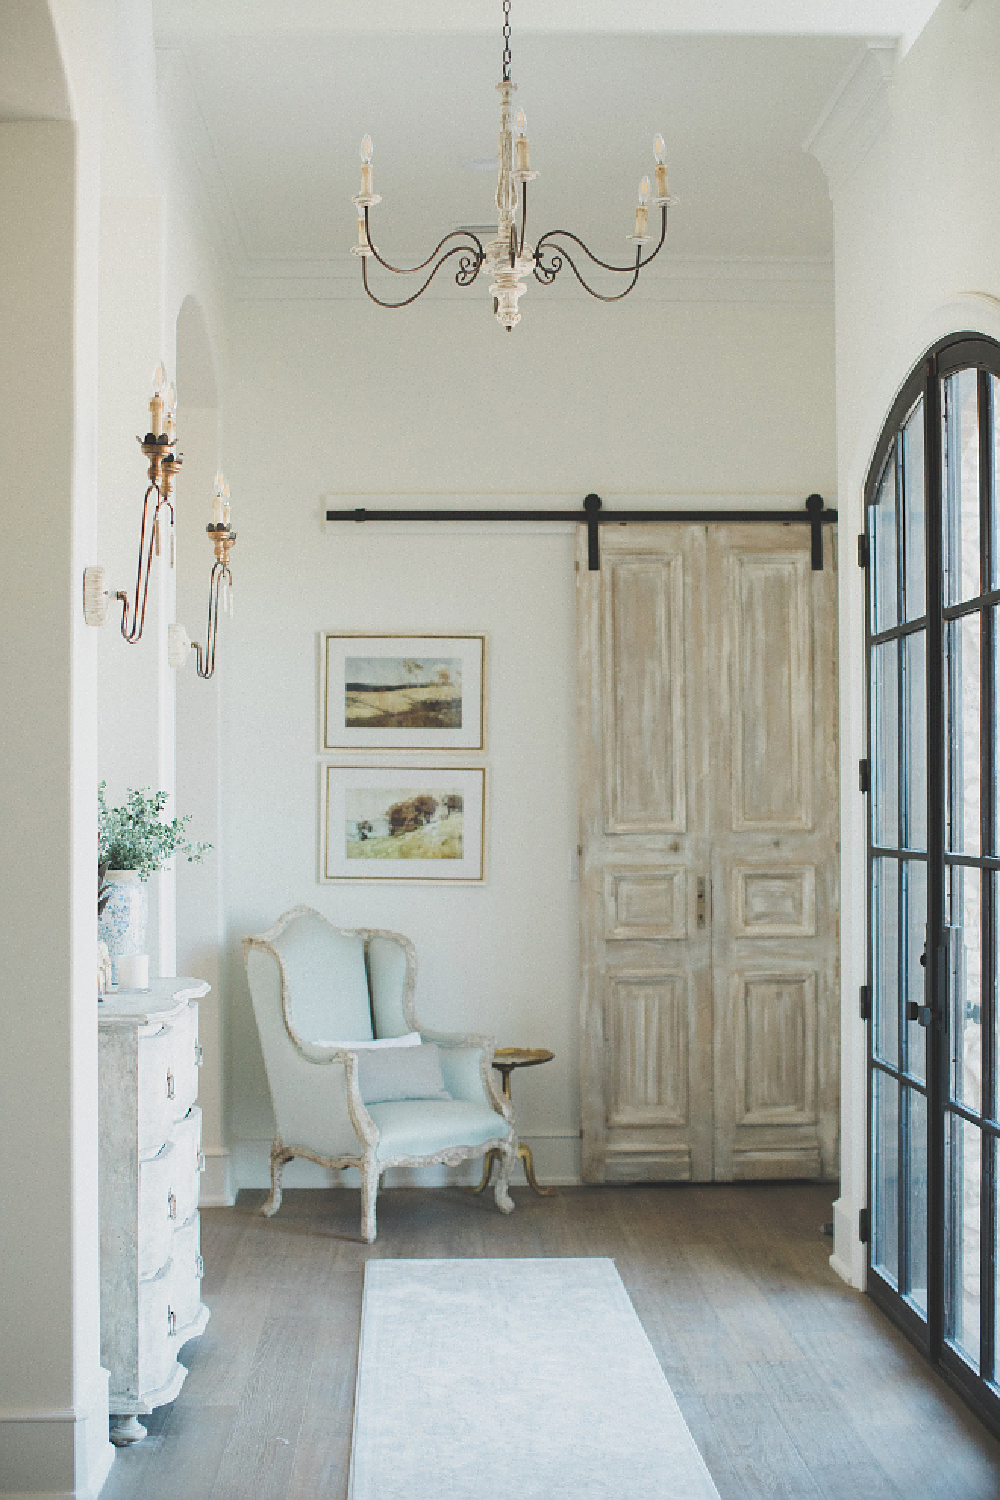 Steel doors, sliding custom barn door, French country lighting, and romantic charm in an entry of a new build home - Brit Jones.